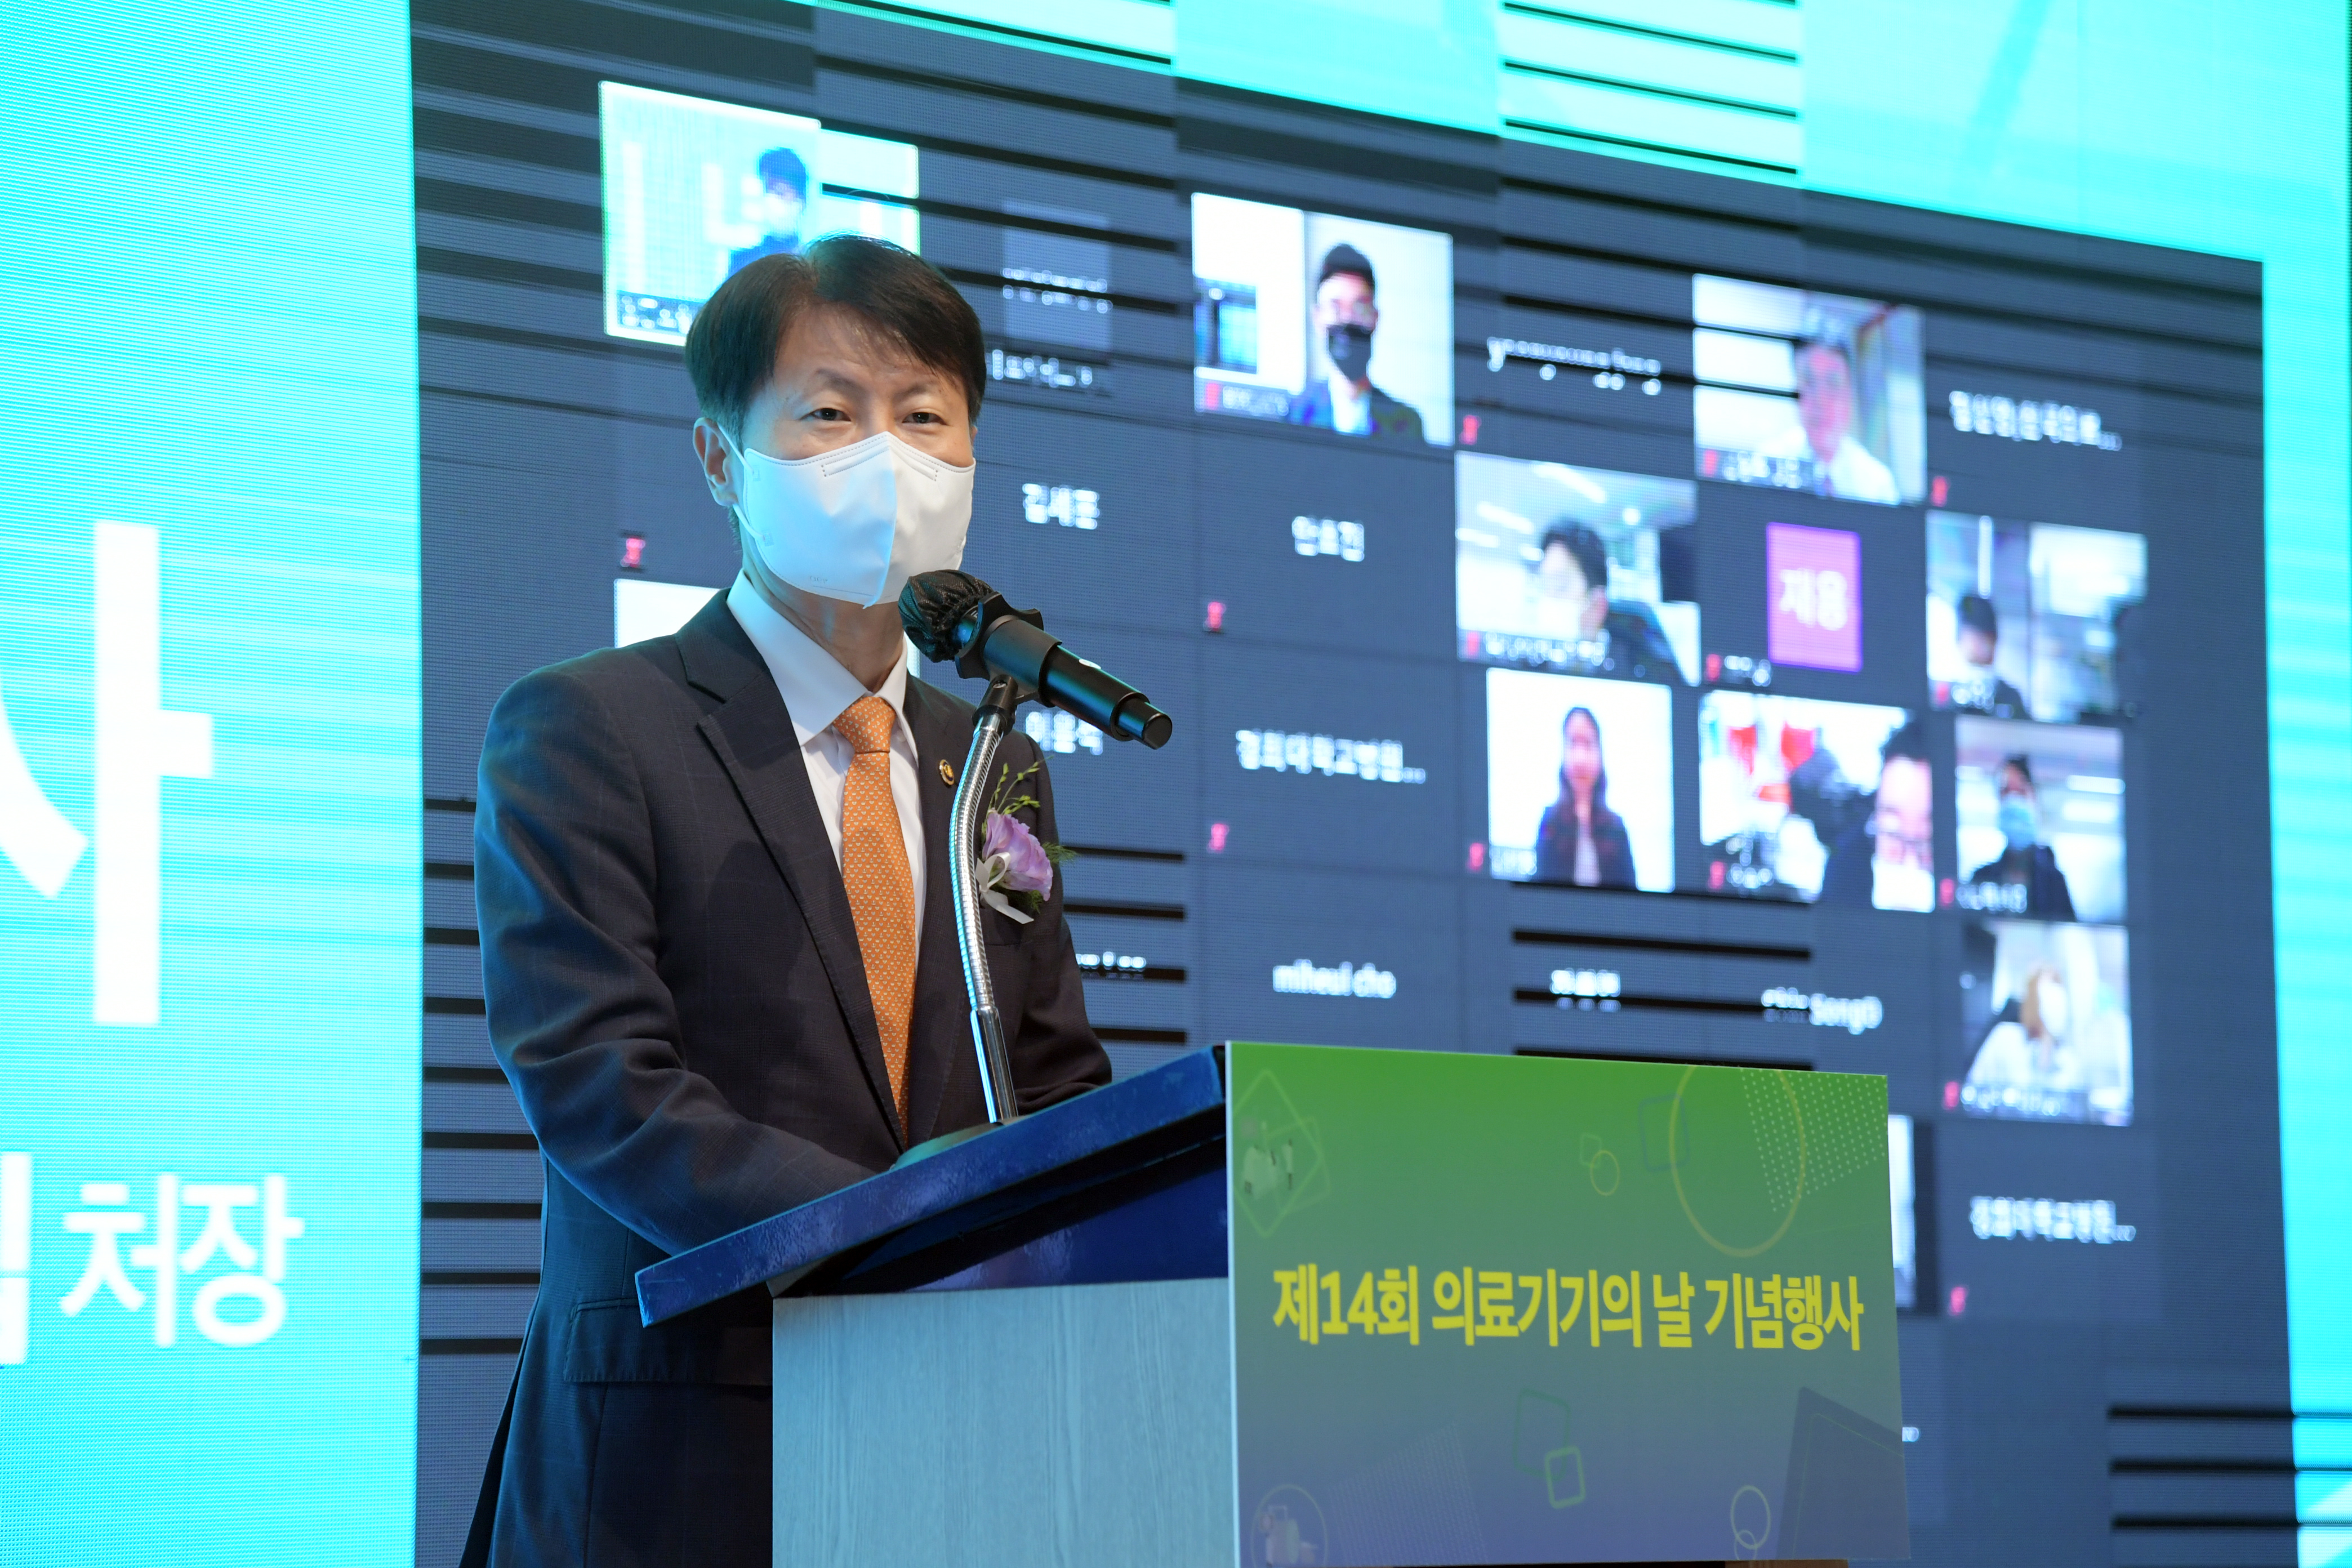 Photo News3 - [May 28, 2021] Minister attends the 14th Medical Device Day Ceremony